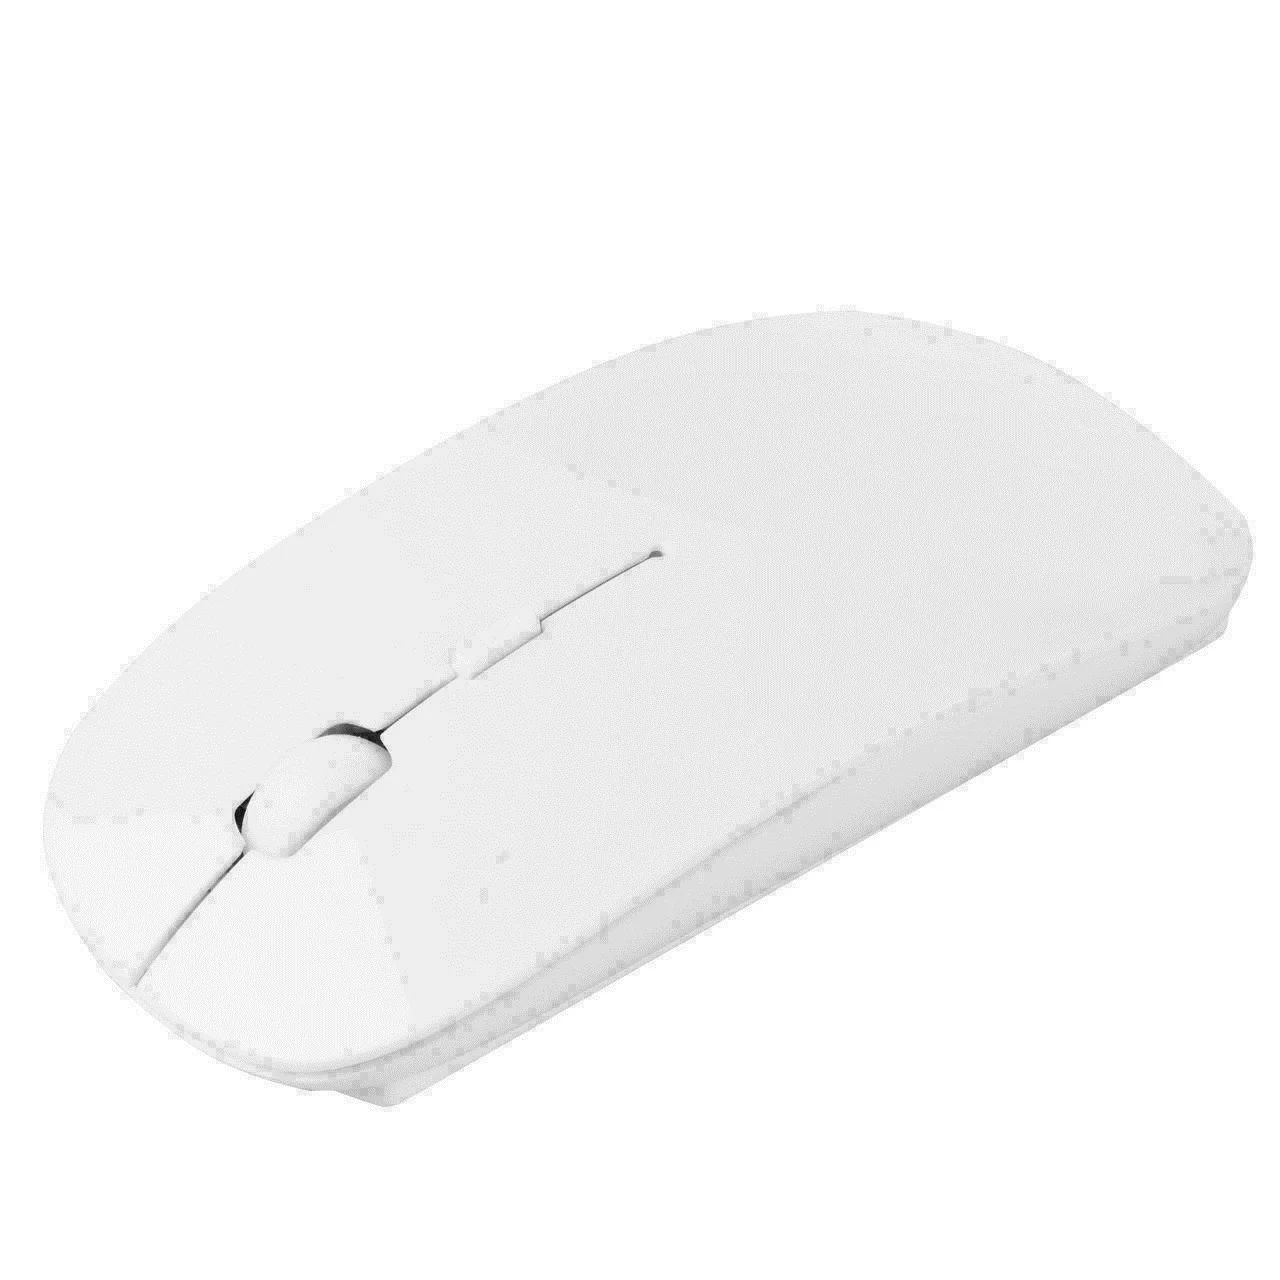 mouse for apple mac Mouse Mice Optical Scroll For Laptop PC Computer + USB 2.4 GHz Wireless Cordless silent wireless mouse Mice